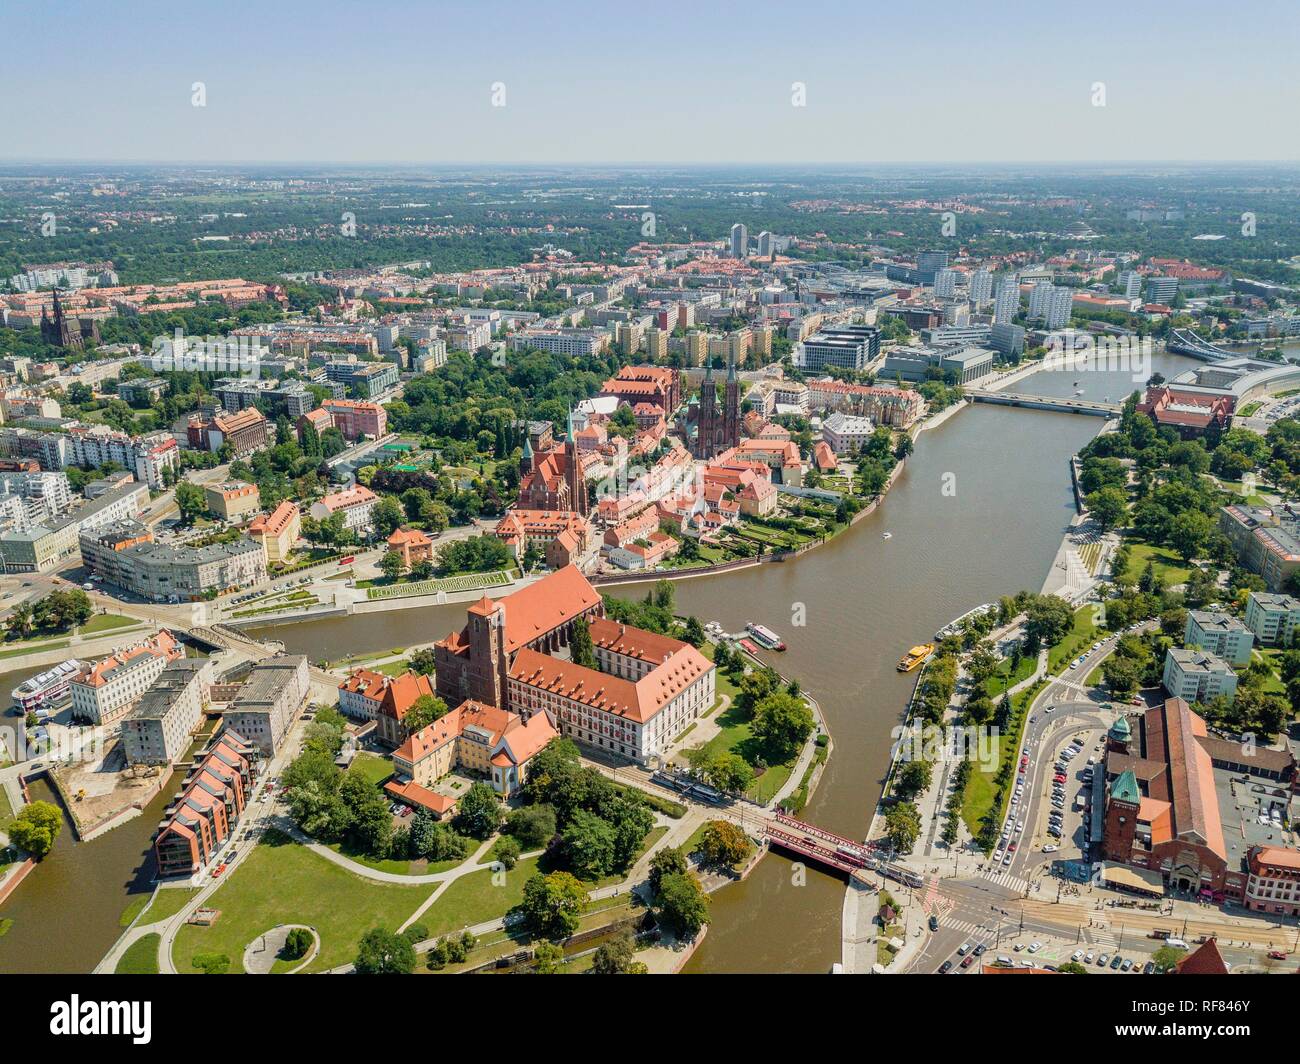 Drone image of the oldest, historic part of Wroclaw located mostly on the islands, Poland Stock Photo